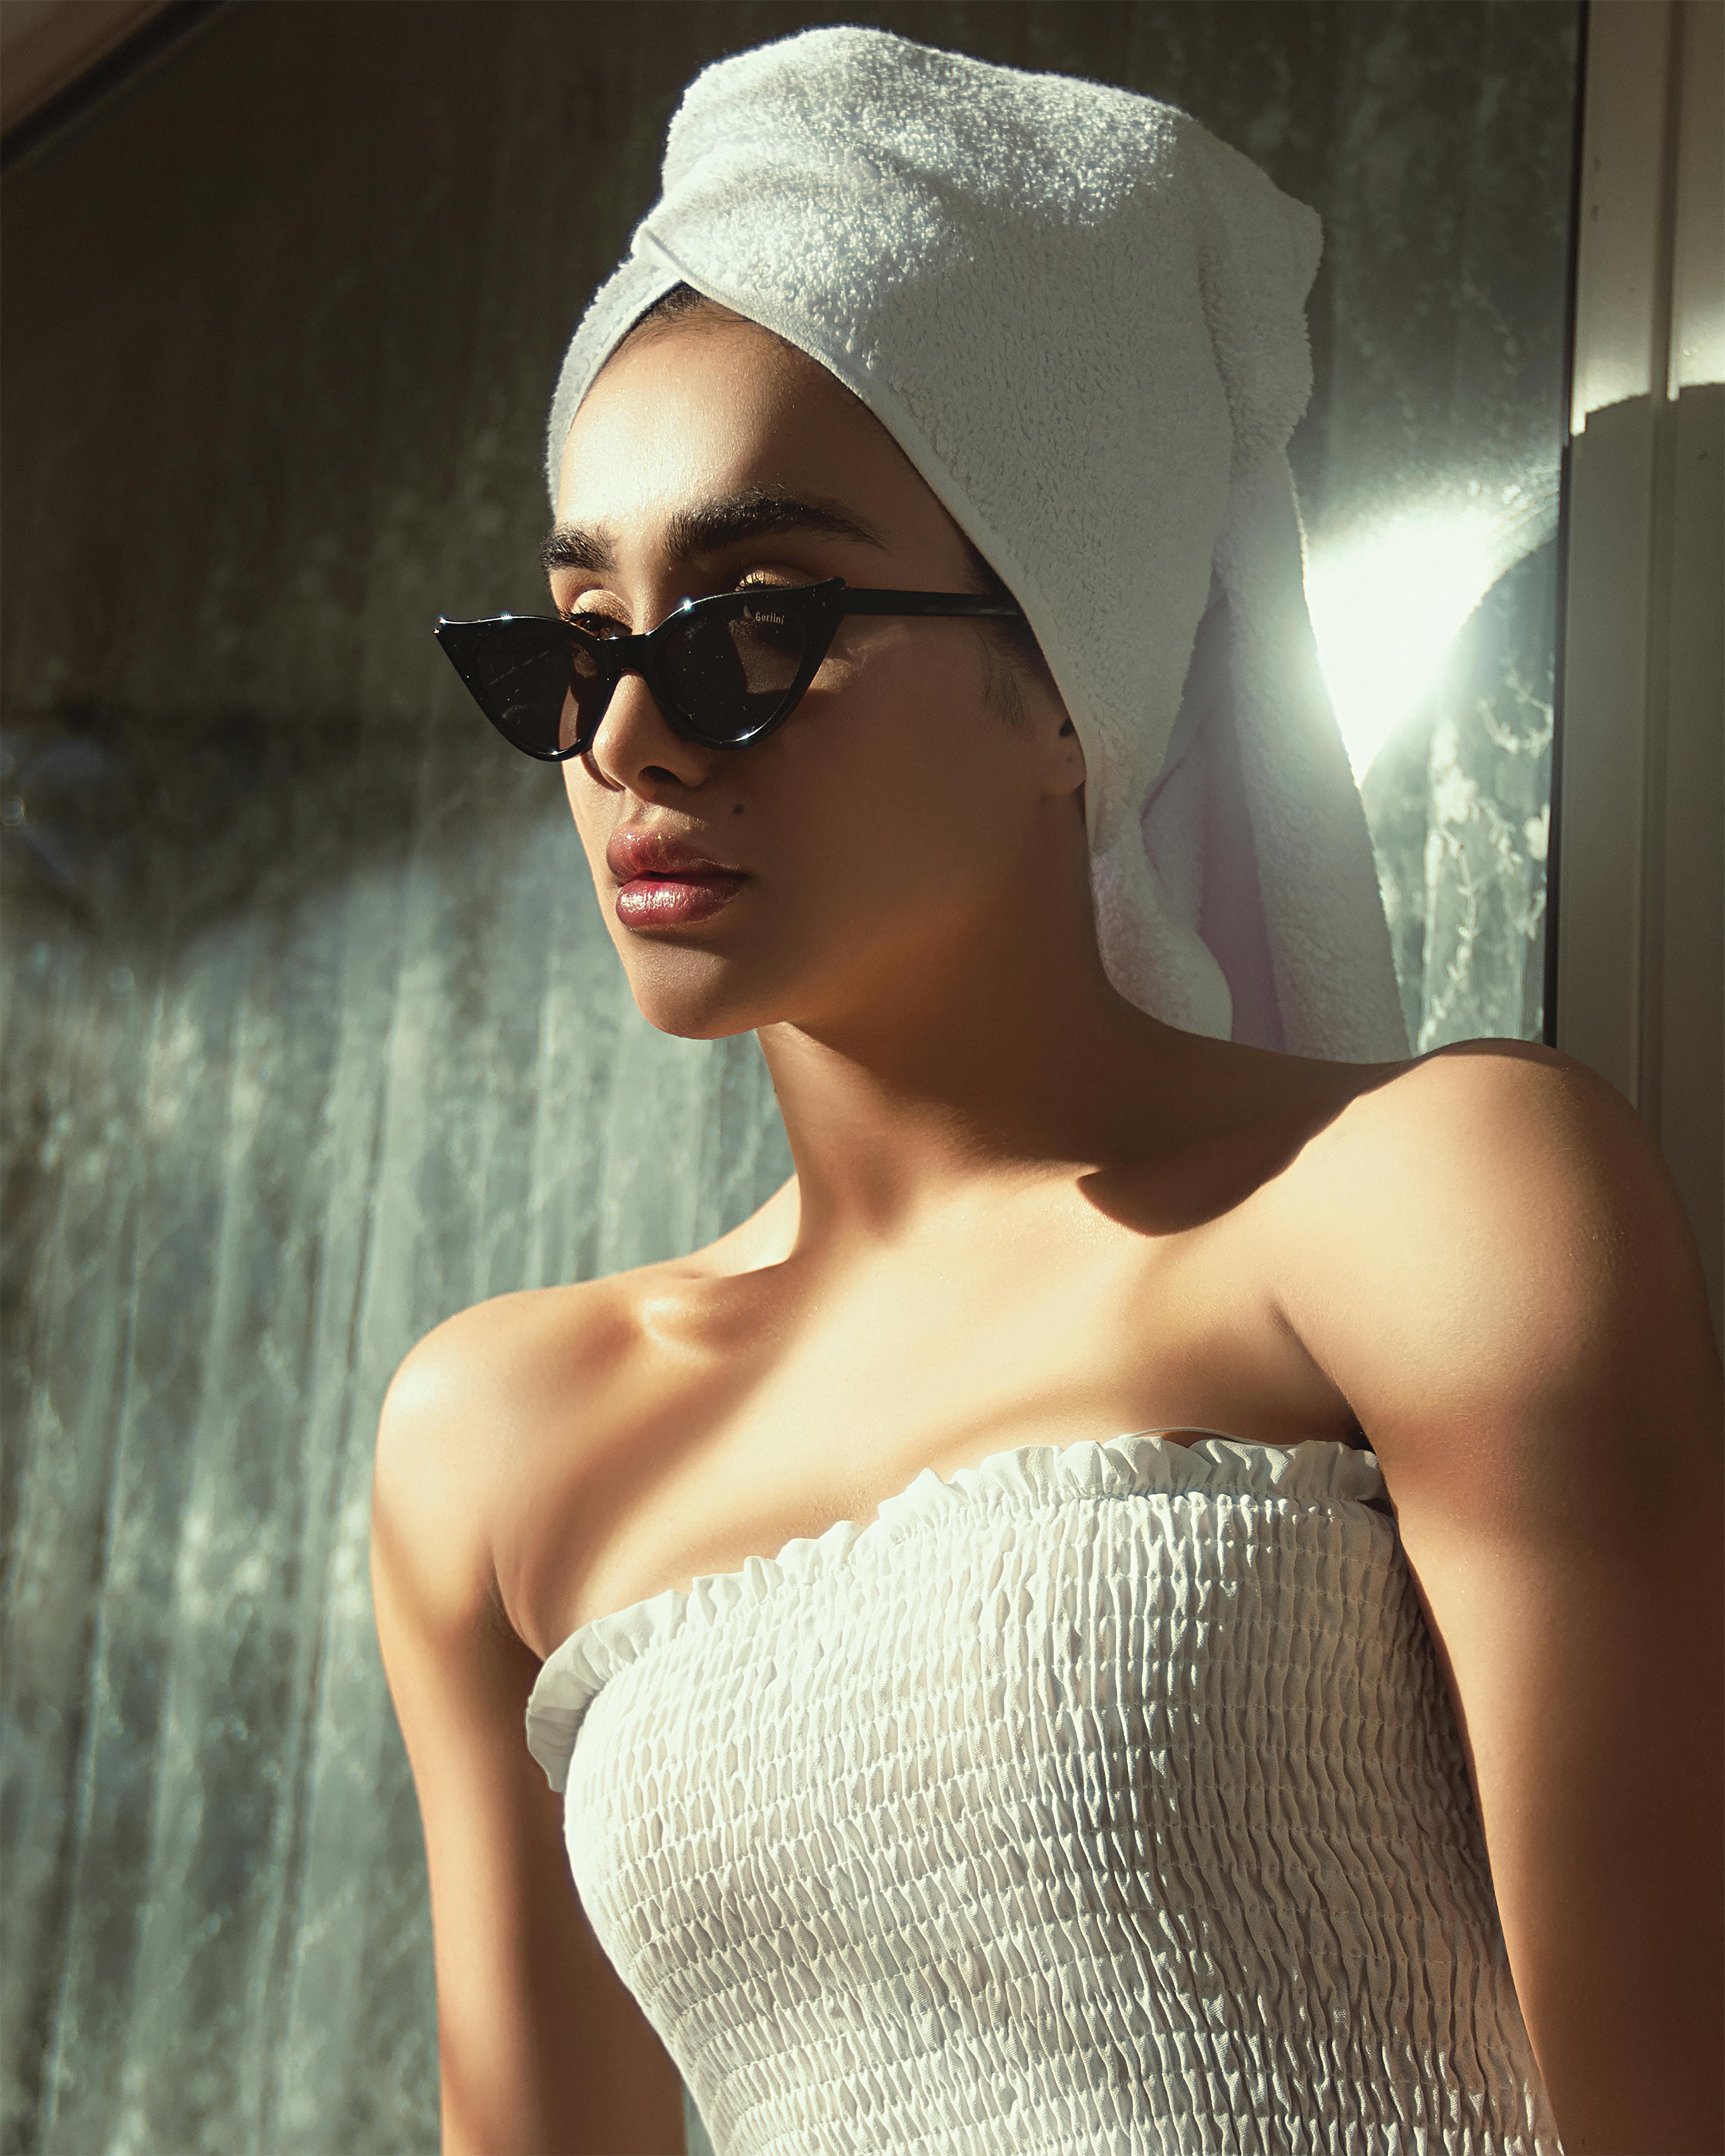 Free A Portrait of a Woman in a Head Towel and Sunglasses Stock Photo